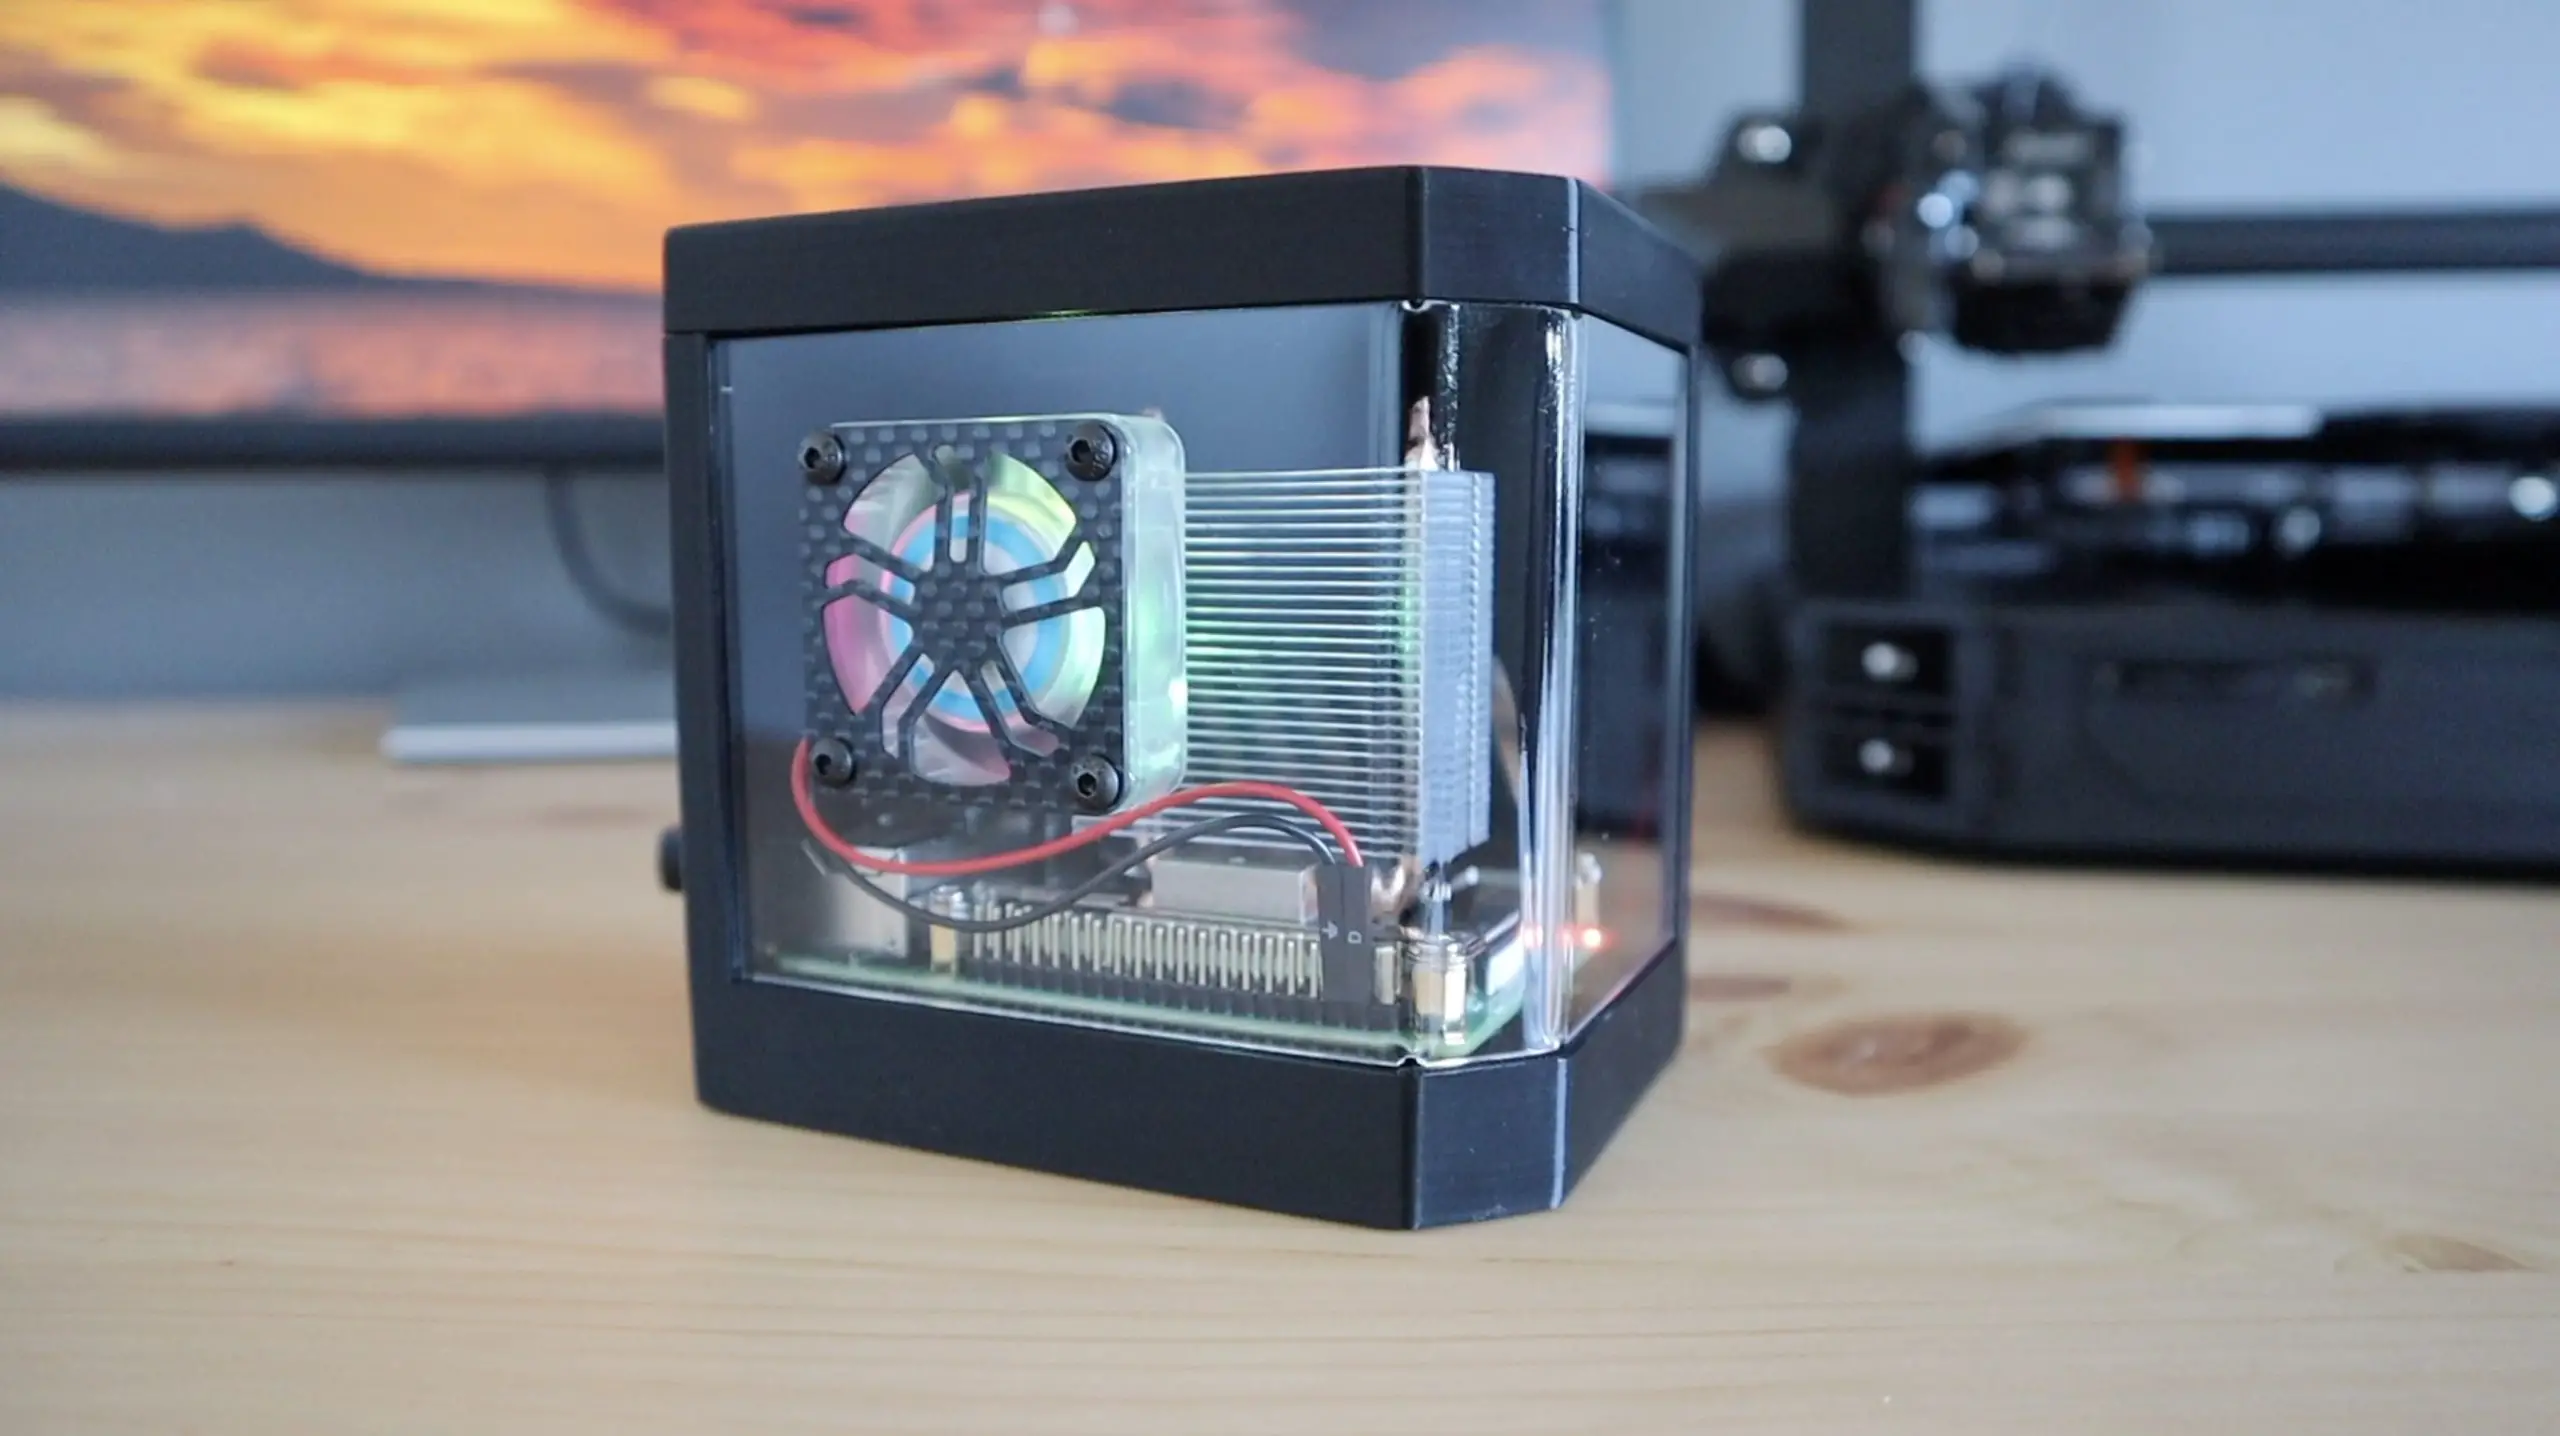 3D Printed Raspberry Pi Case For Ice Cube Cooler